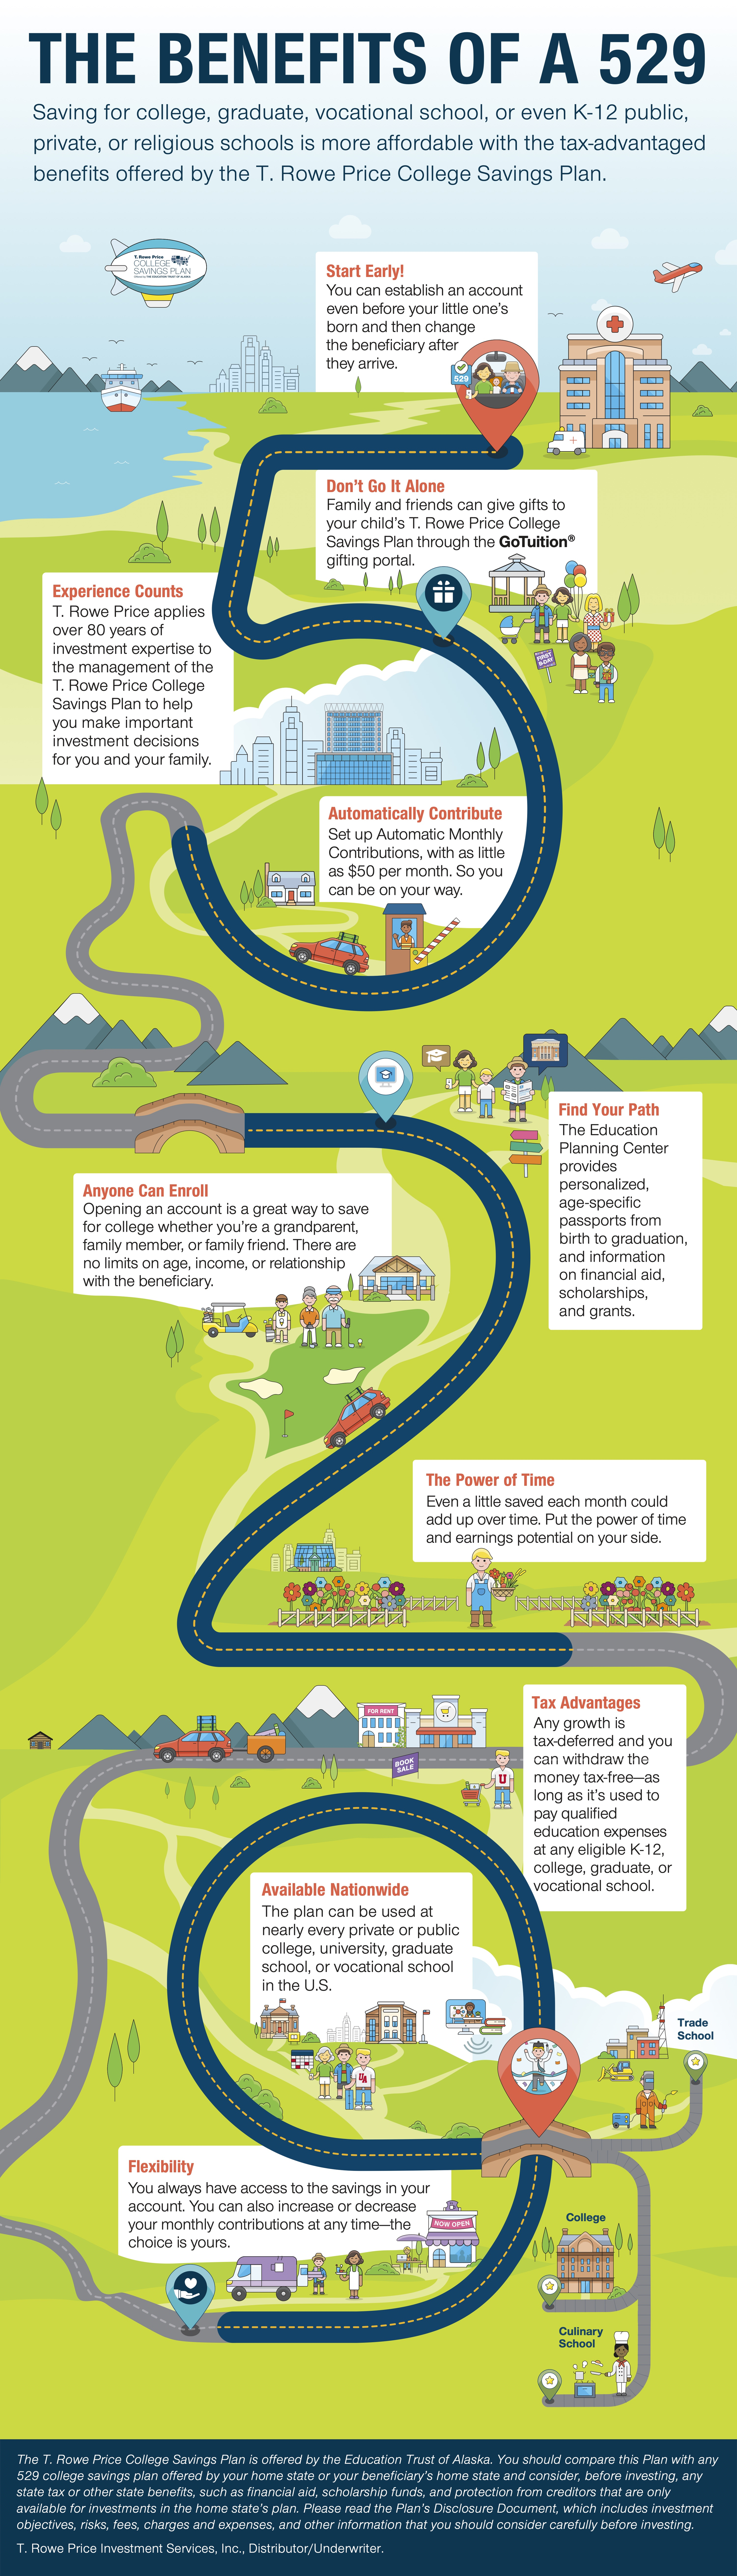 The Benefits of a 529 Plan Infographic